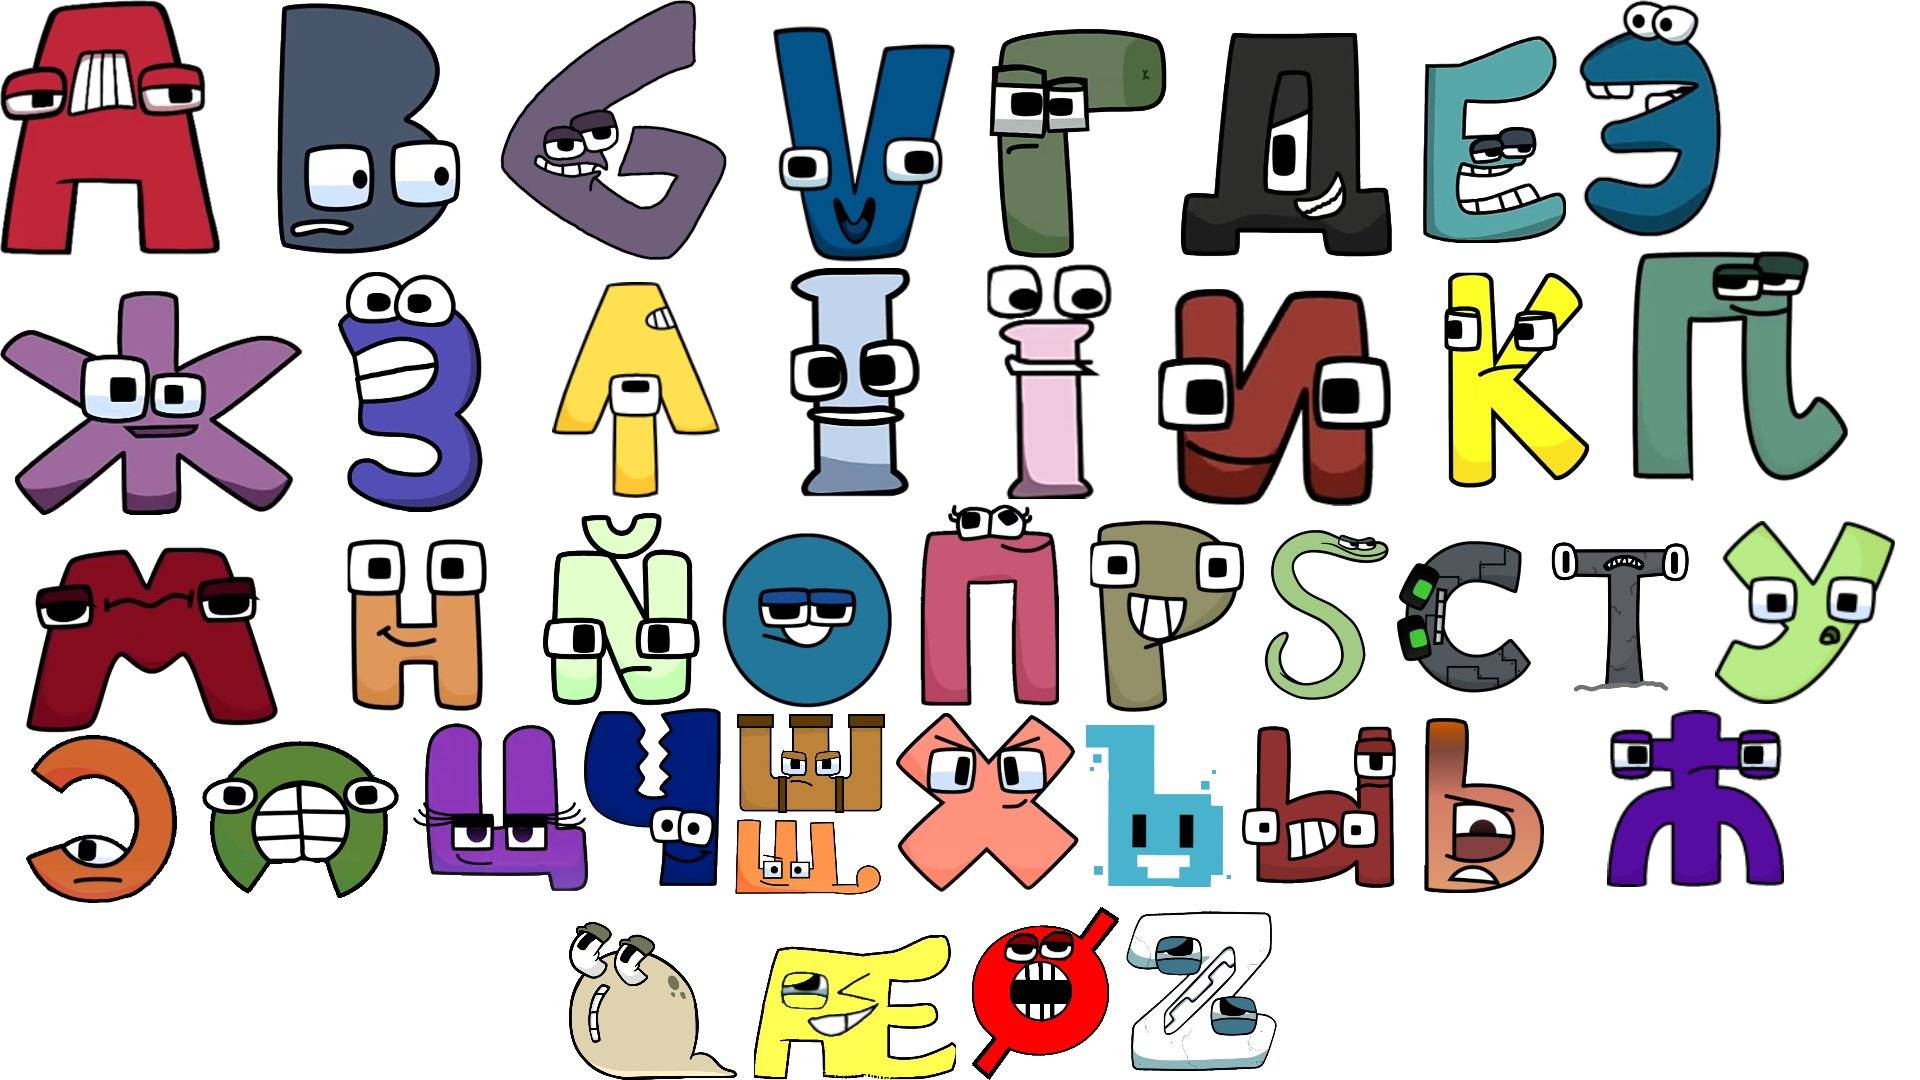 Official?) Alphabet Lore Logo by PuteraEverything on DeviantArt